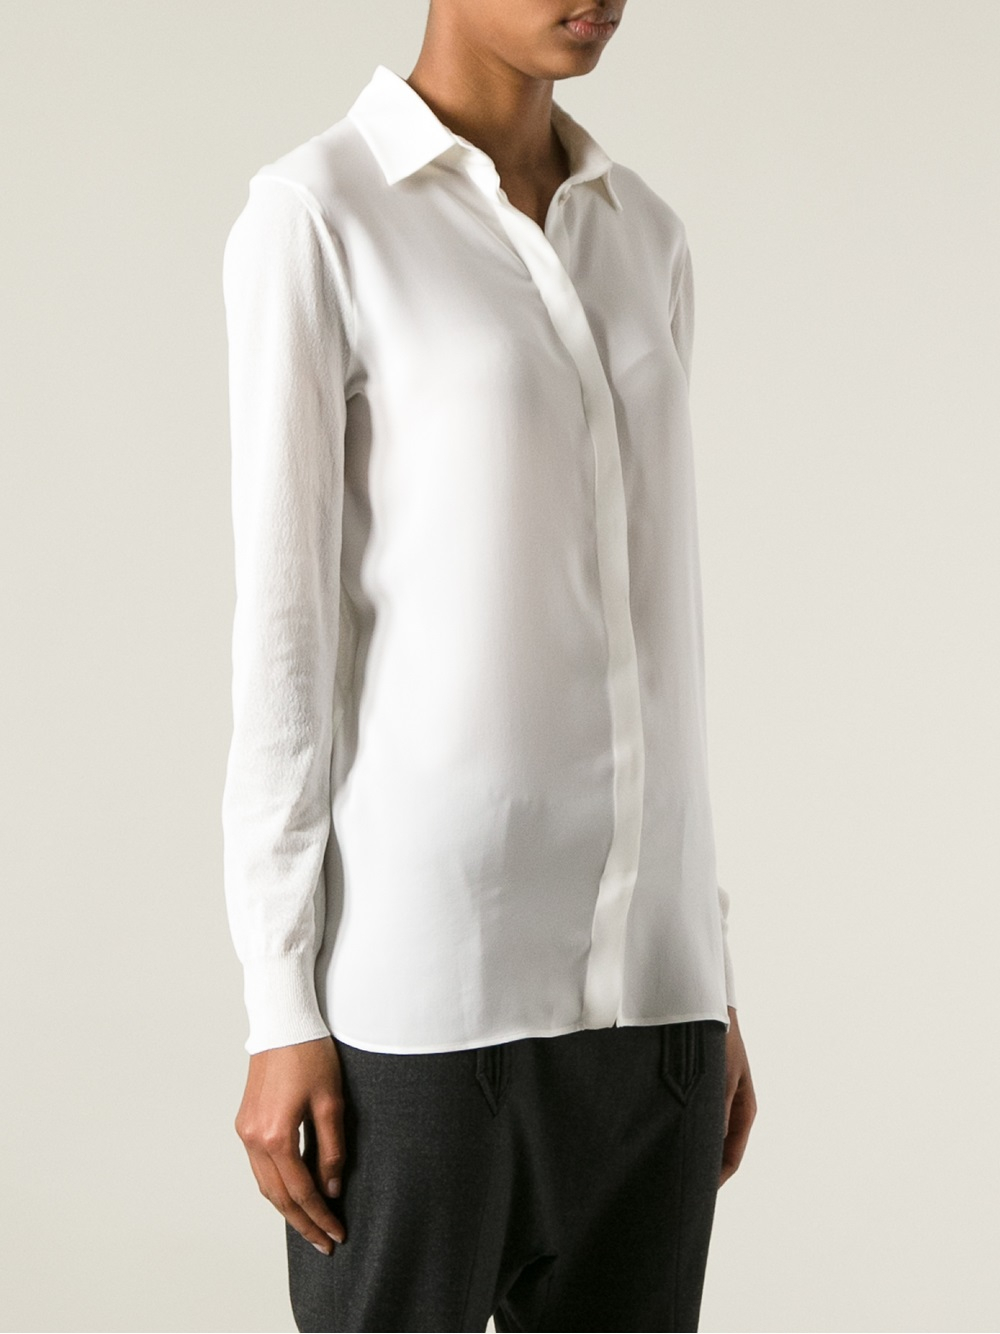 Gucci Long Sleeve Shirt in White - Lyst